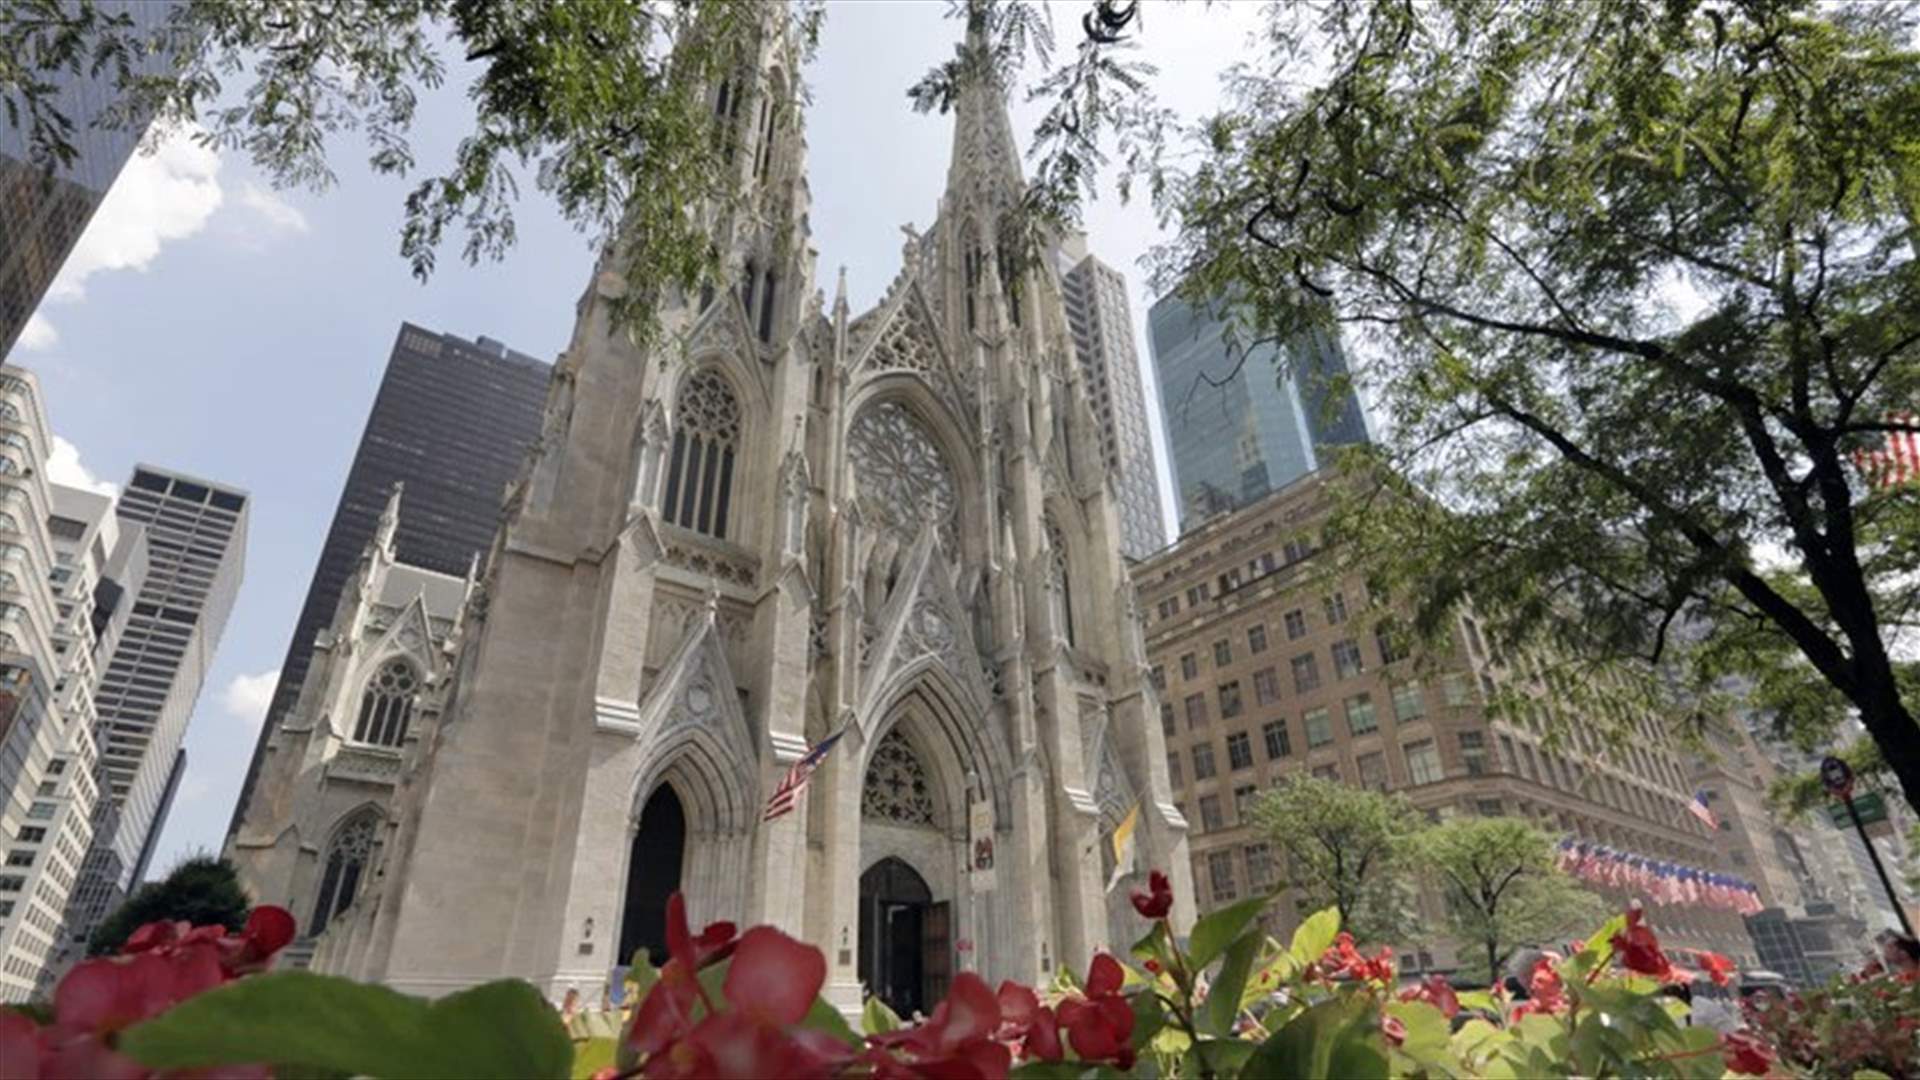 Man caught walking into New York cathedral with full gasoline cans, lighters -police